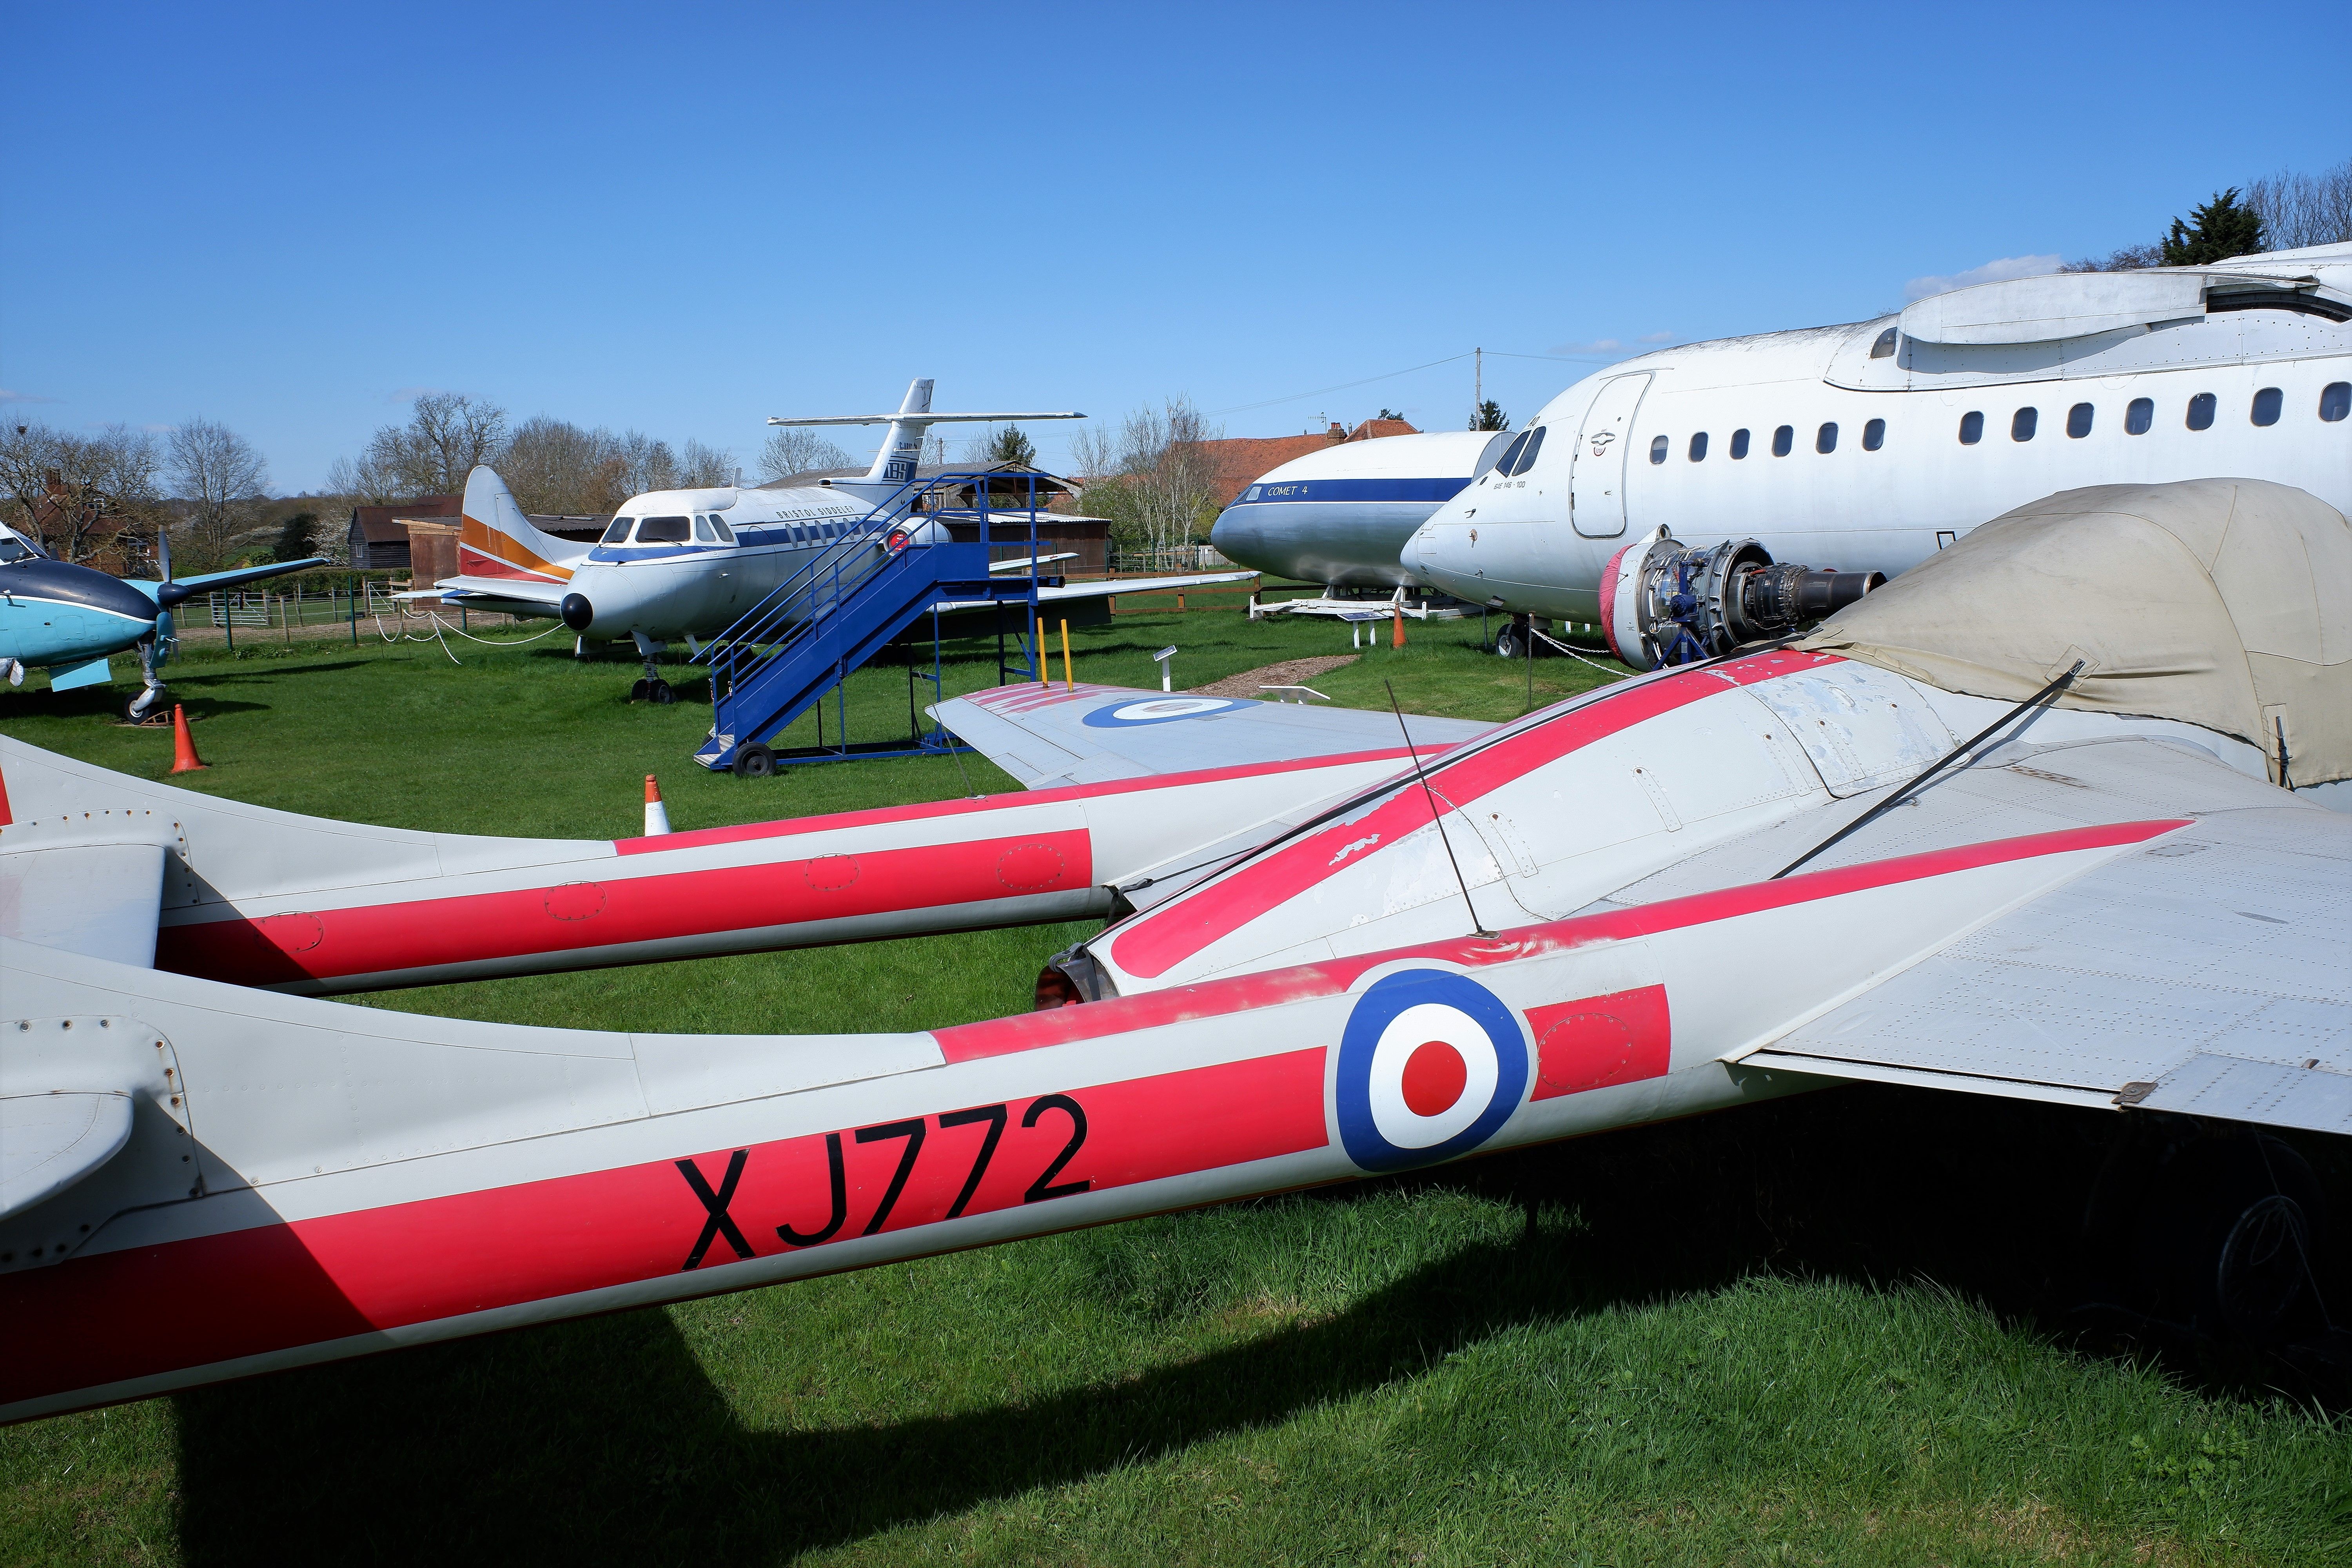 Many aircraft at the de Havilland museum in the UK.